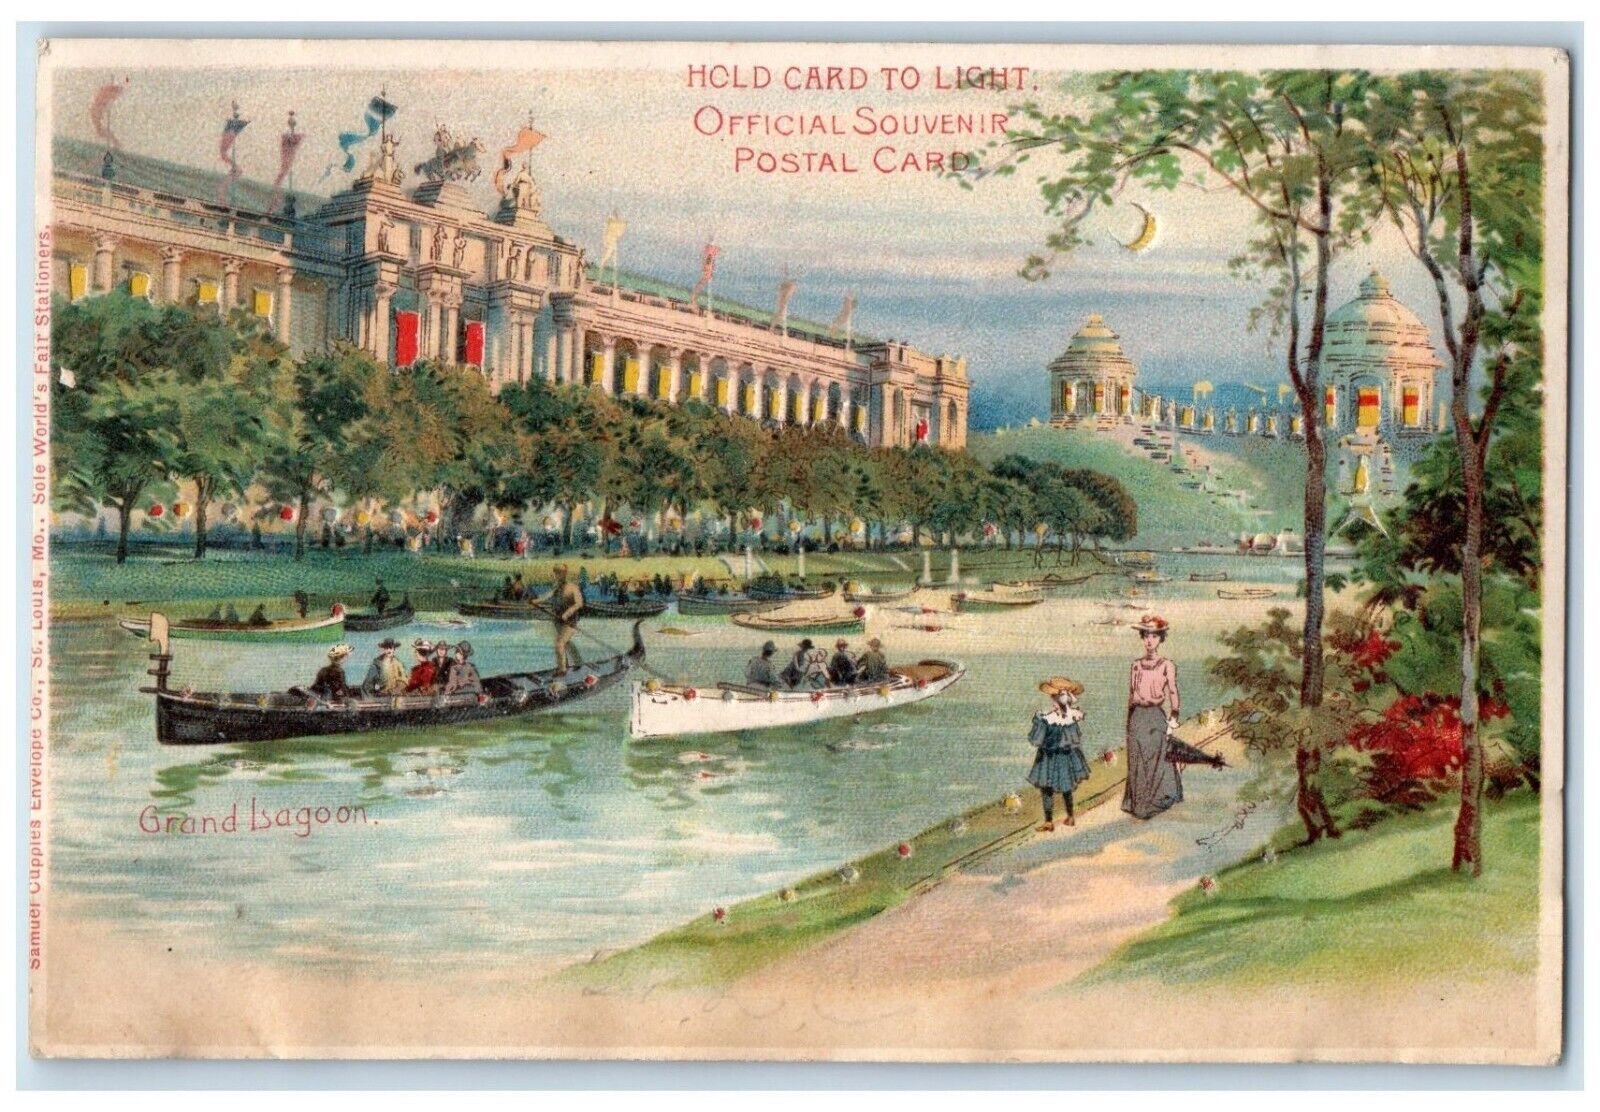 c1905 Hold Card To Light Grands Lagoon HTL Embossed Antique Postcard